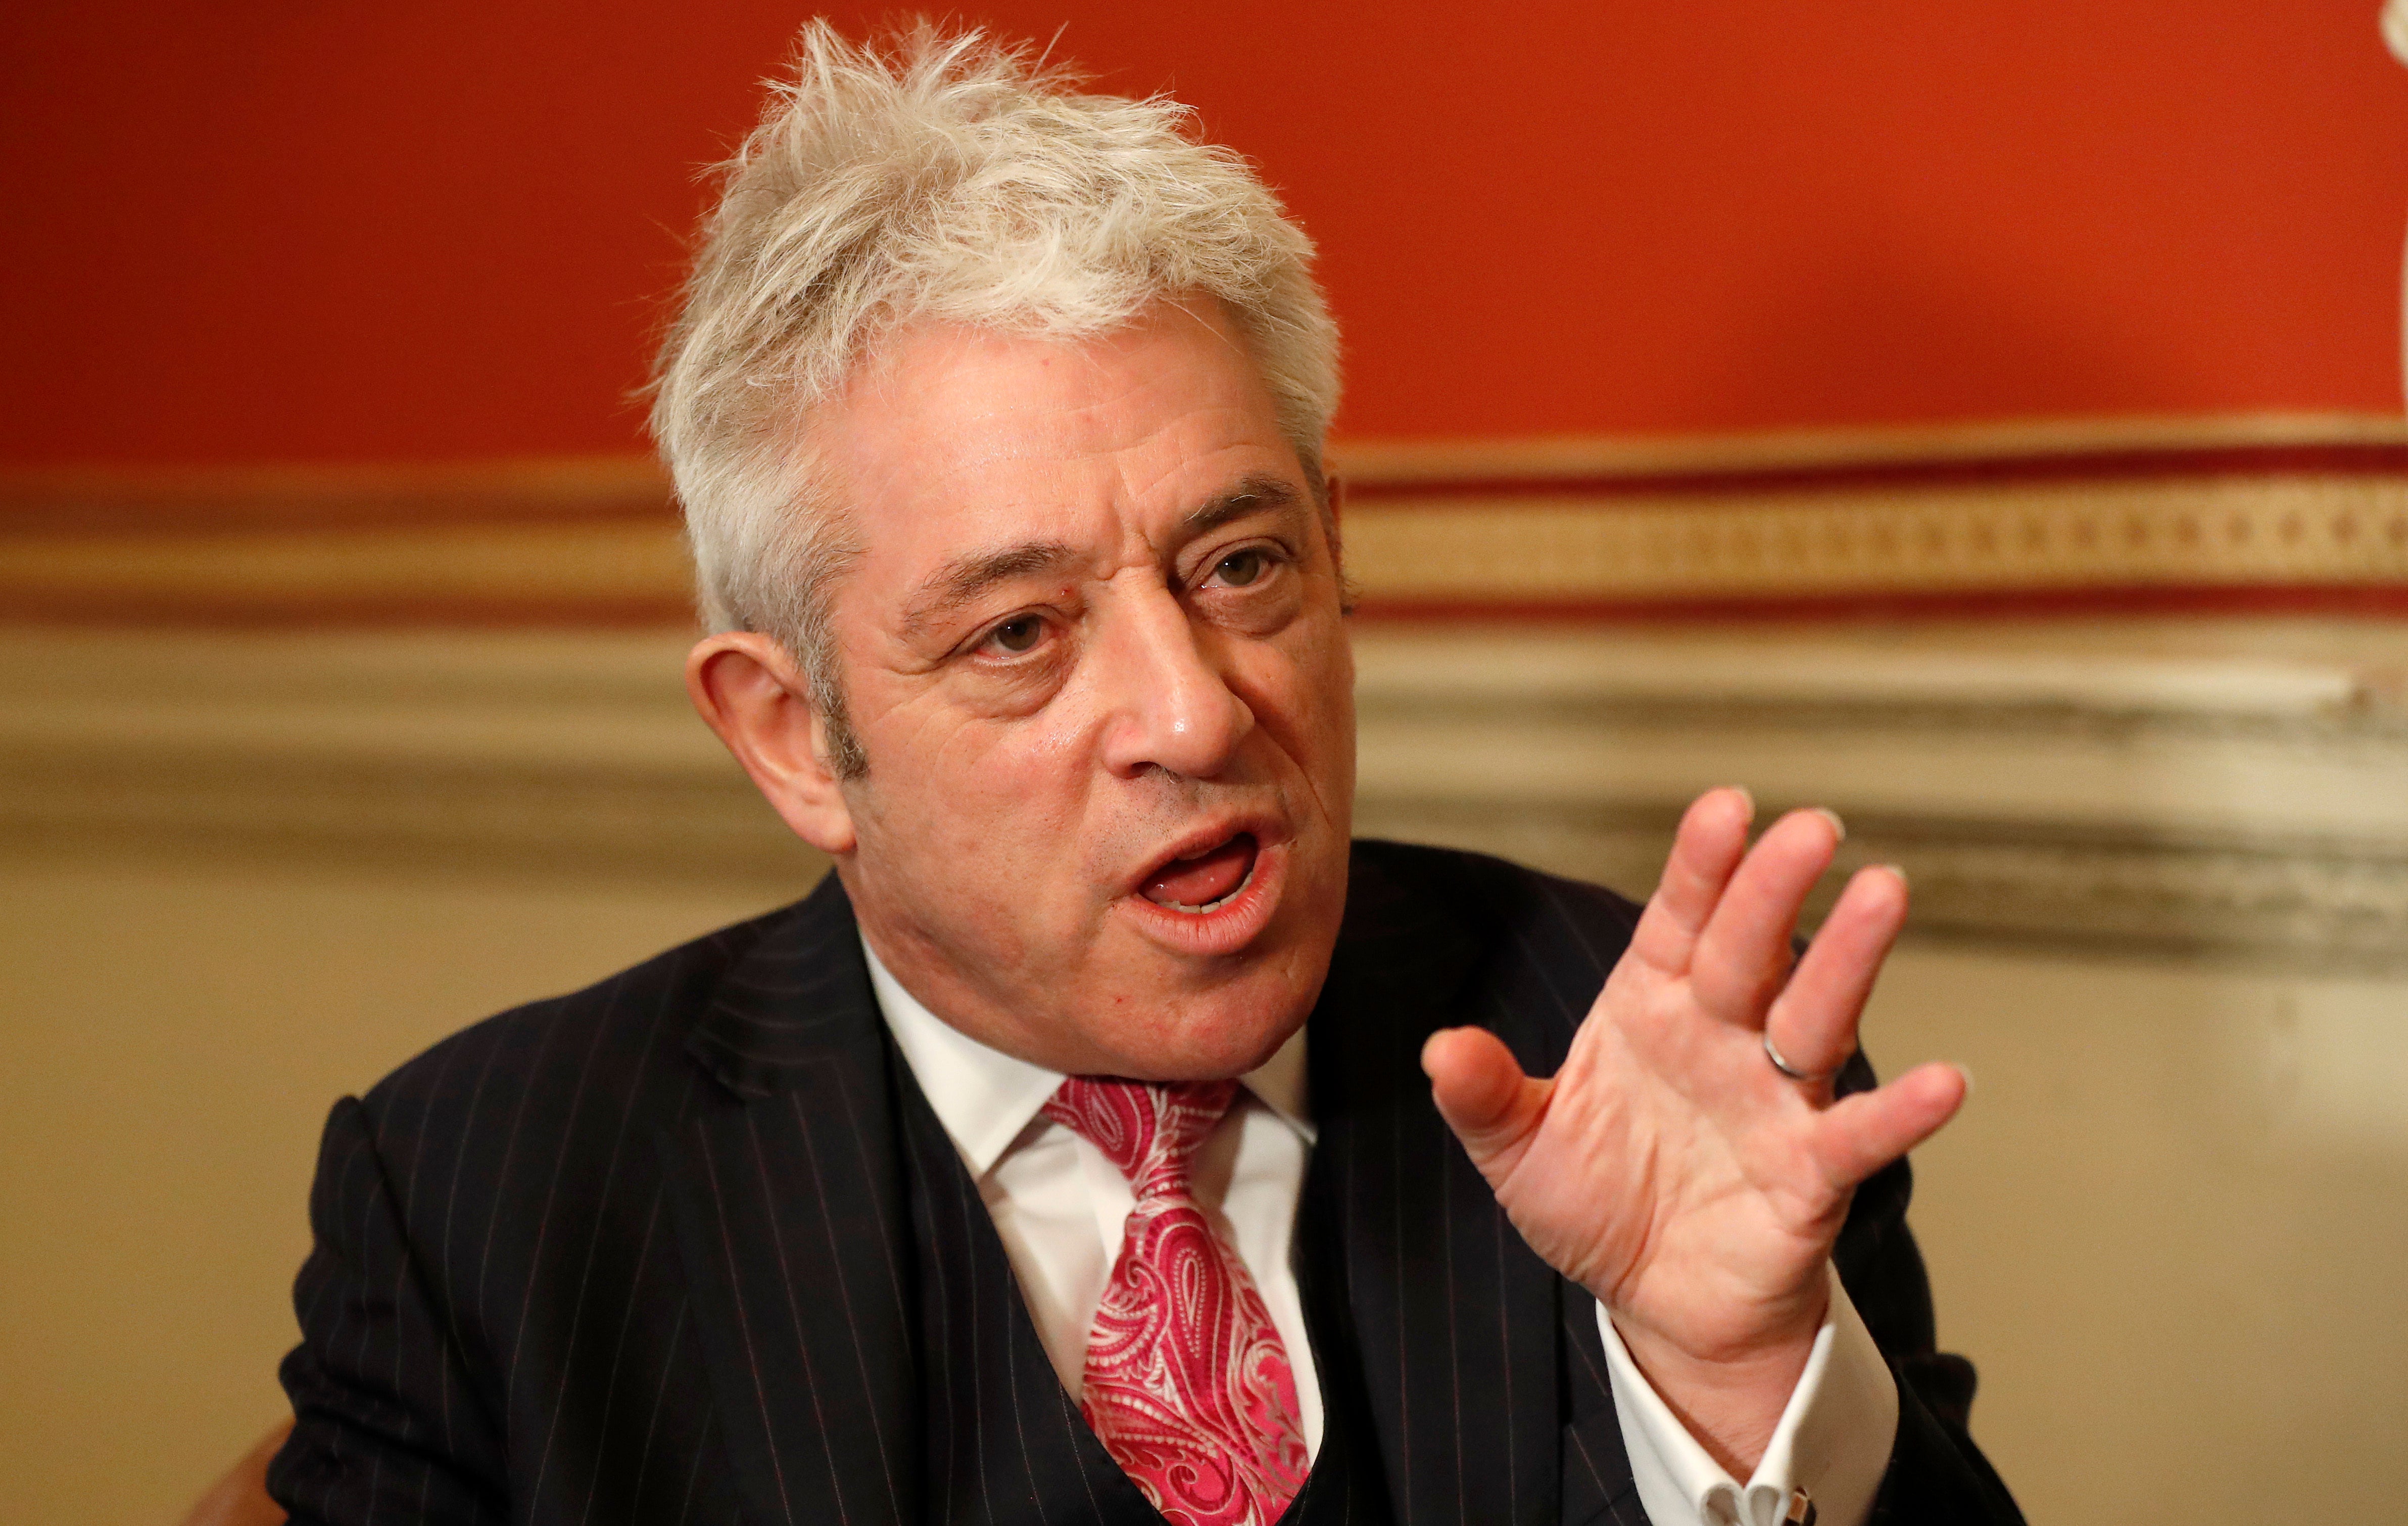 John Bercow has said he recently joined the Labour Party